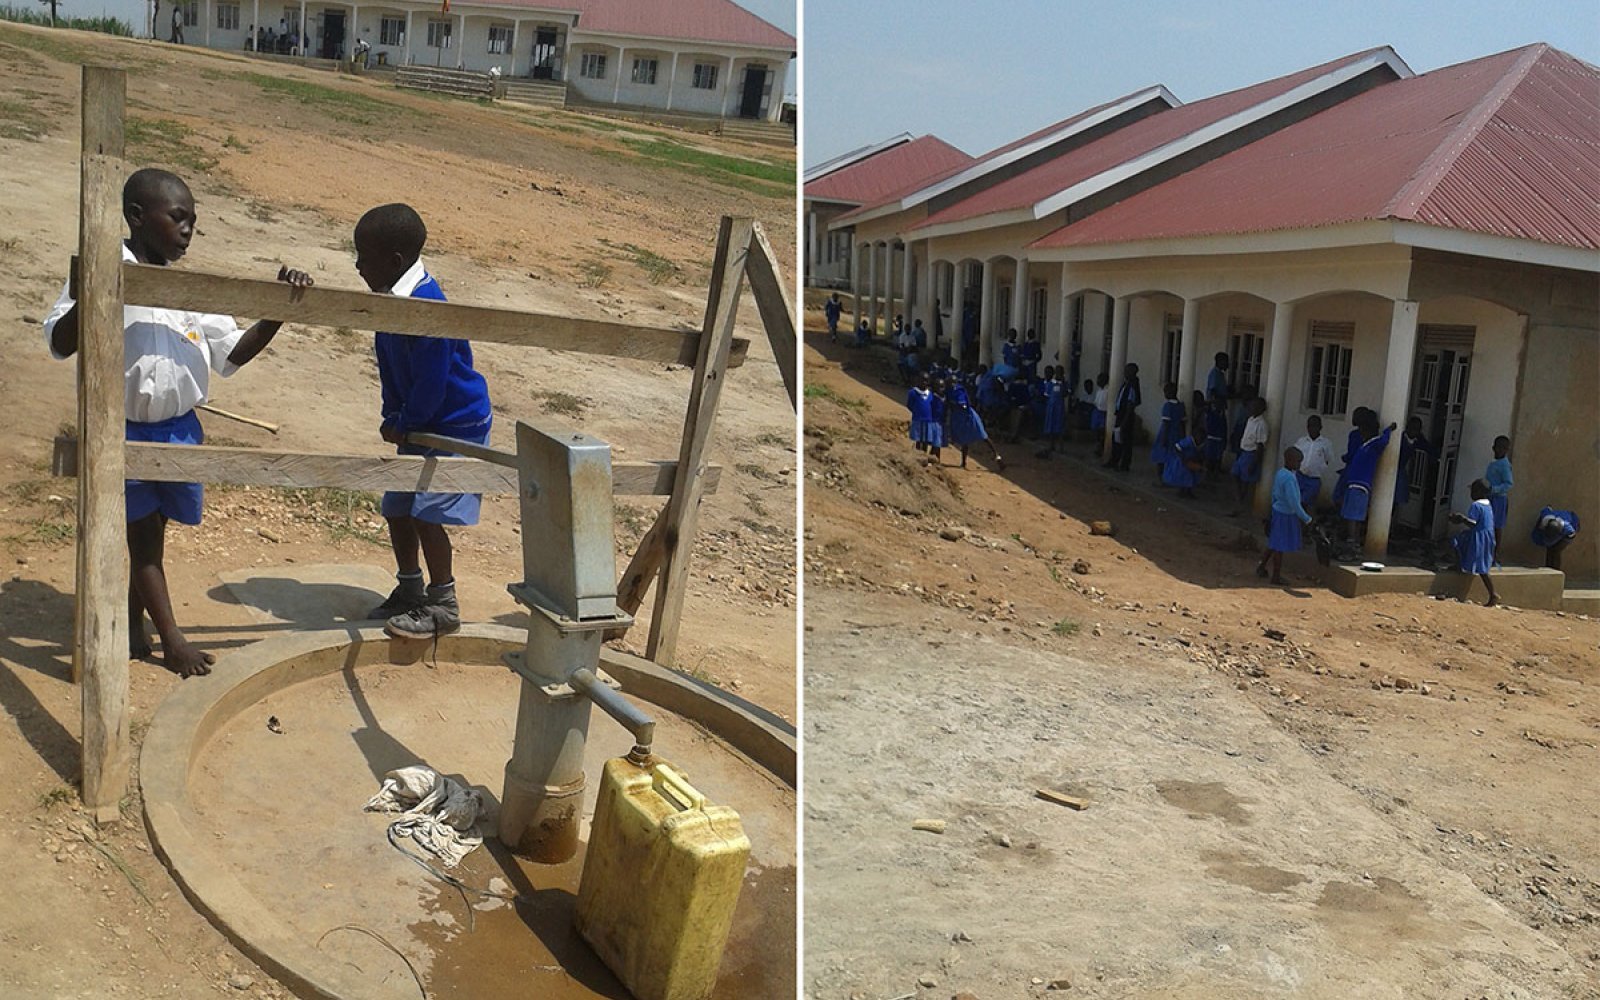 'Saint Klaus' Trade School for 410 students nearing completion, with children from the Orphanage at the new well